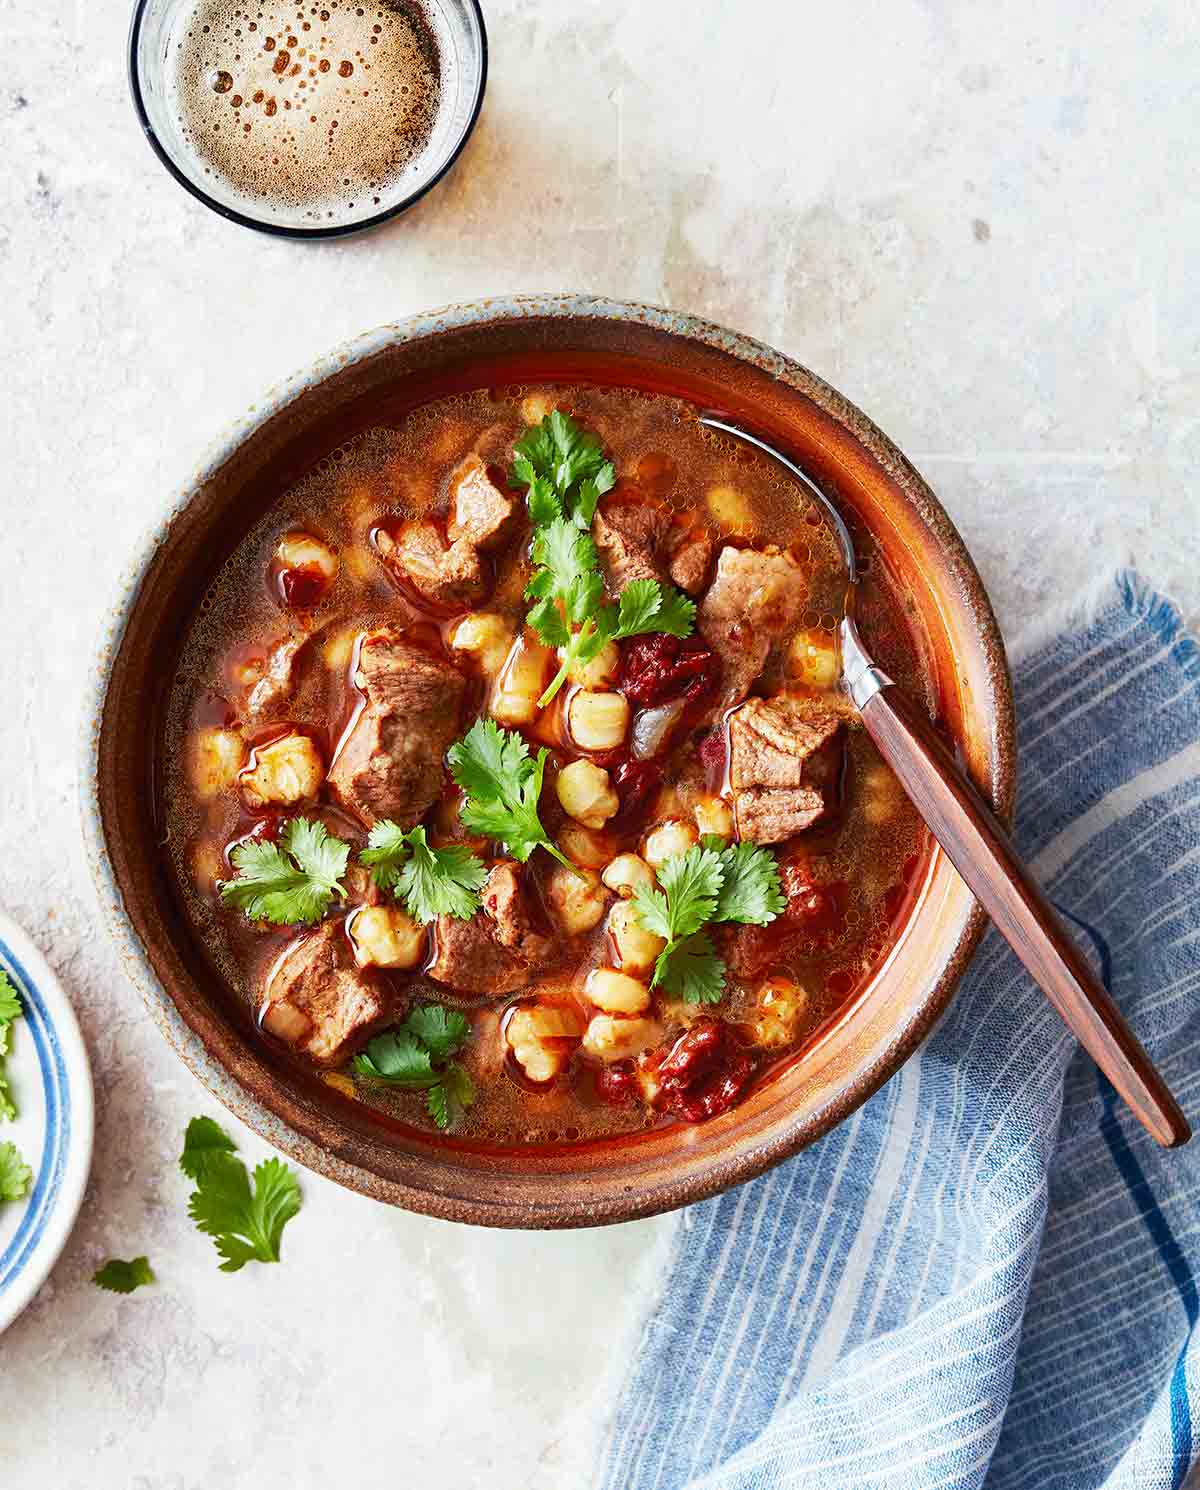 A brown bowl of Instant Pot pork stew with hominy with a spoon resting inside and a dish of cilantro and a blue napkin on the side.